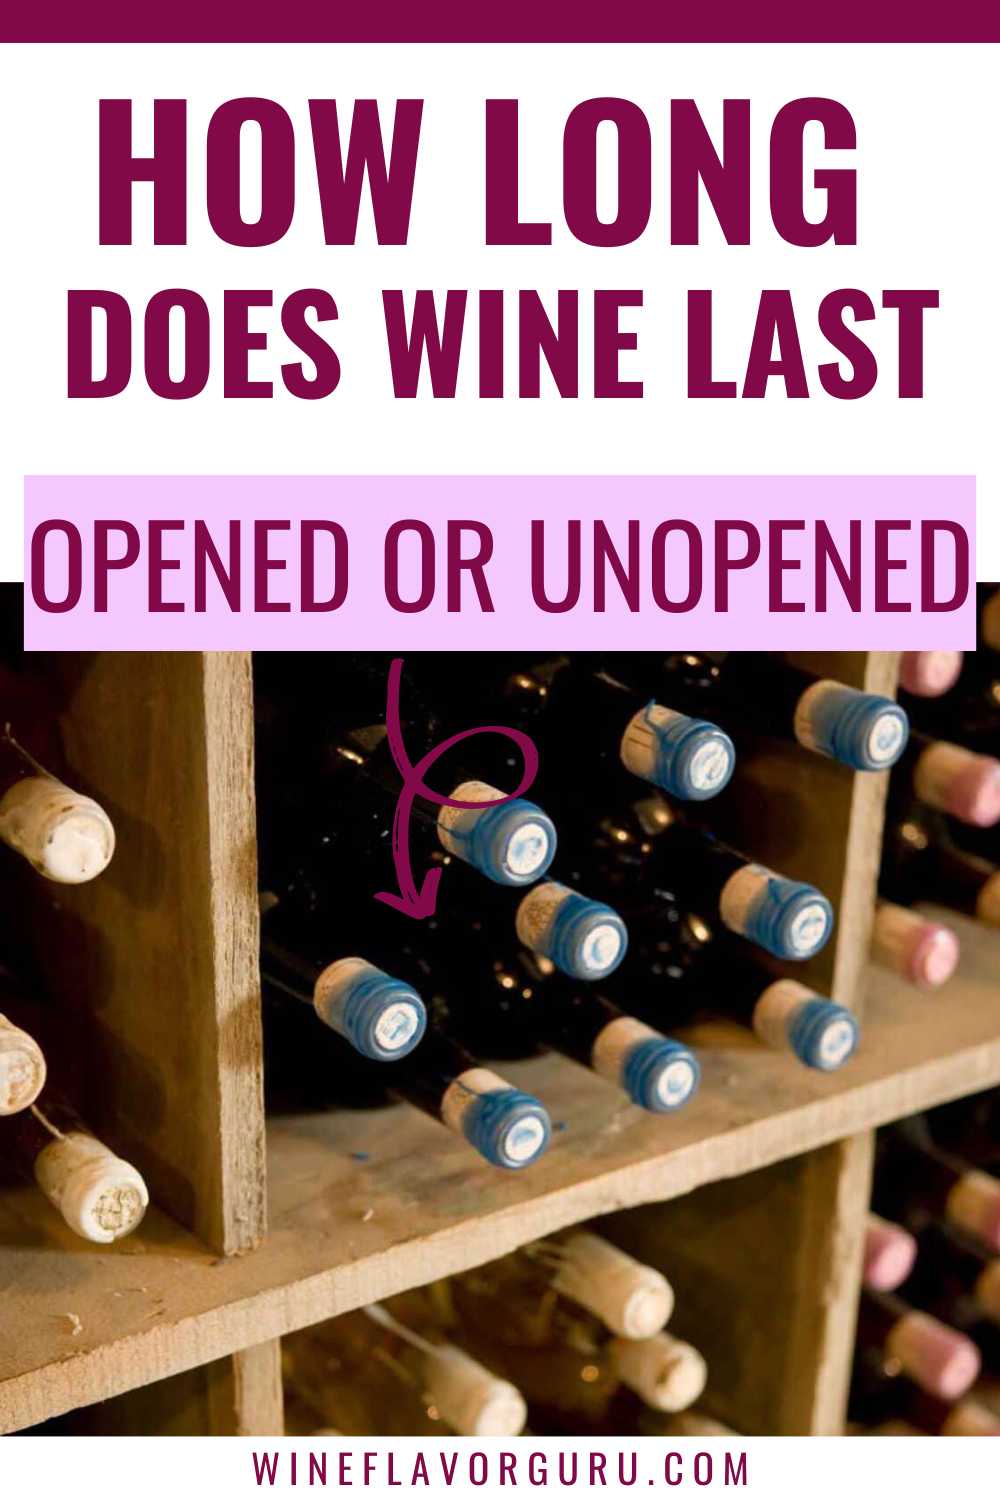 How long can an opened bottle of wine really last?